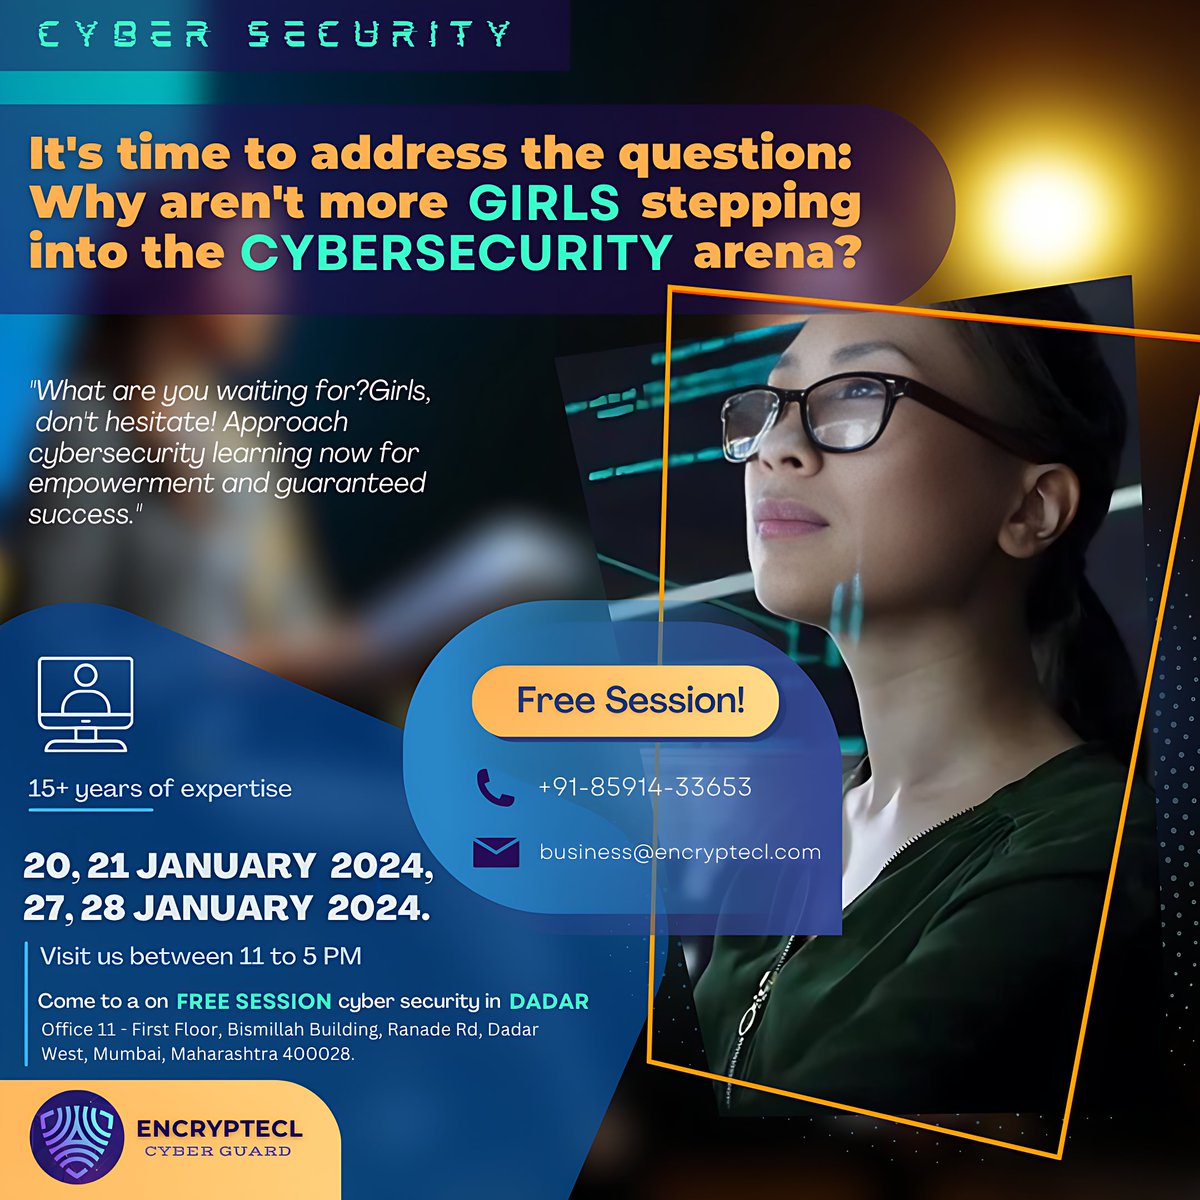 'Cybersecurity  thrives on diversity. Women bring a unique blend of innovation,  precision, and resilience to the forefront of digital defense. Join the  movement for a safer online world. 🚀💻
#encryptecl #WomenInCybersecurity #InnovateWithDiversity #DigitalDefenders #SecureTech